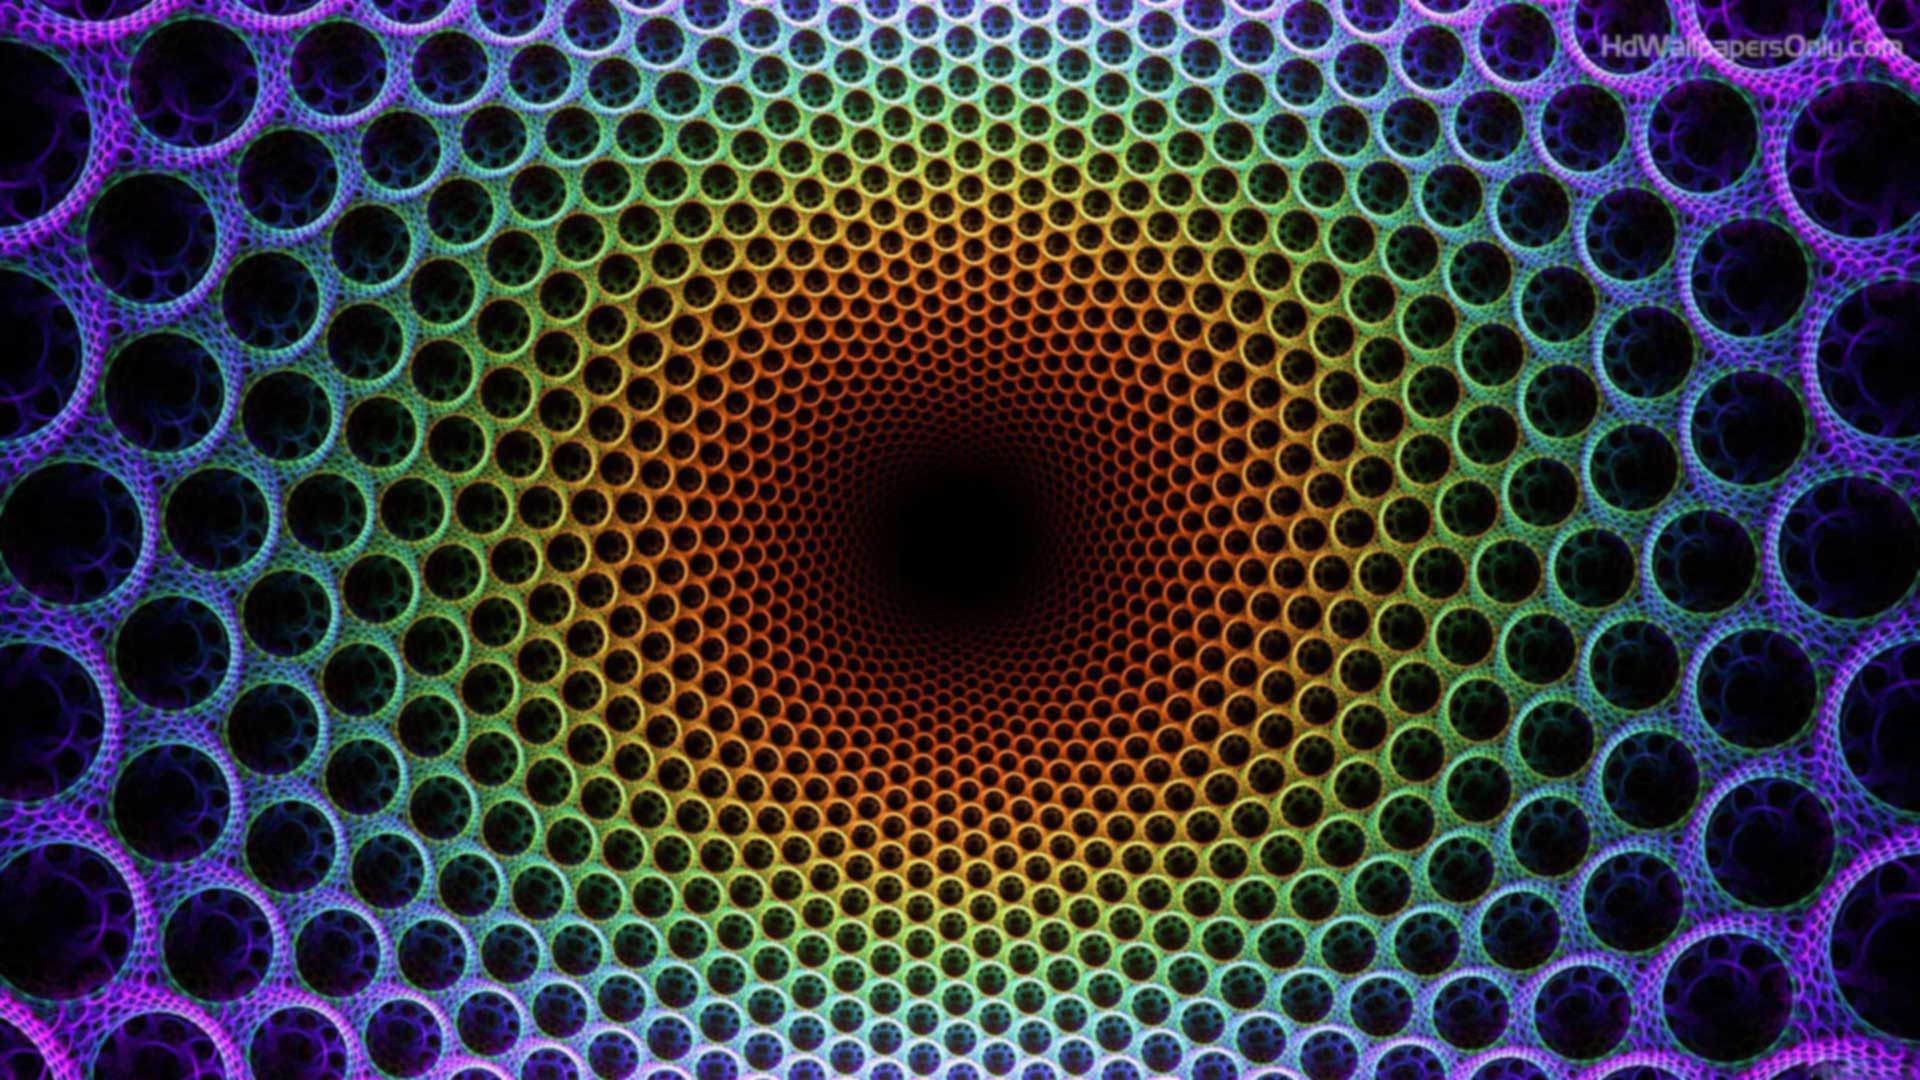 Get These Trippy Wallpapers HD - The Nology